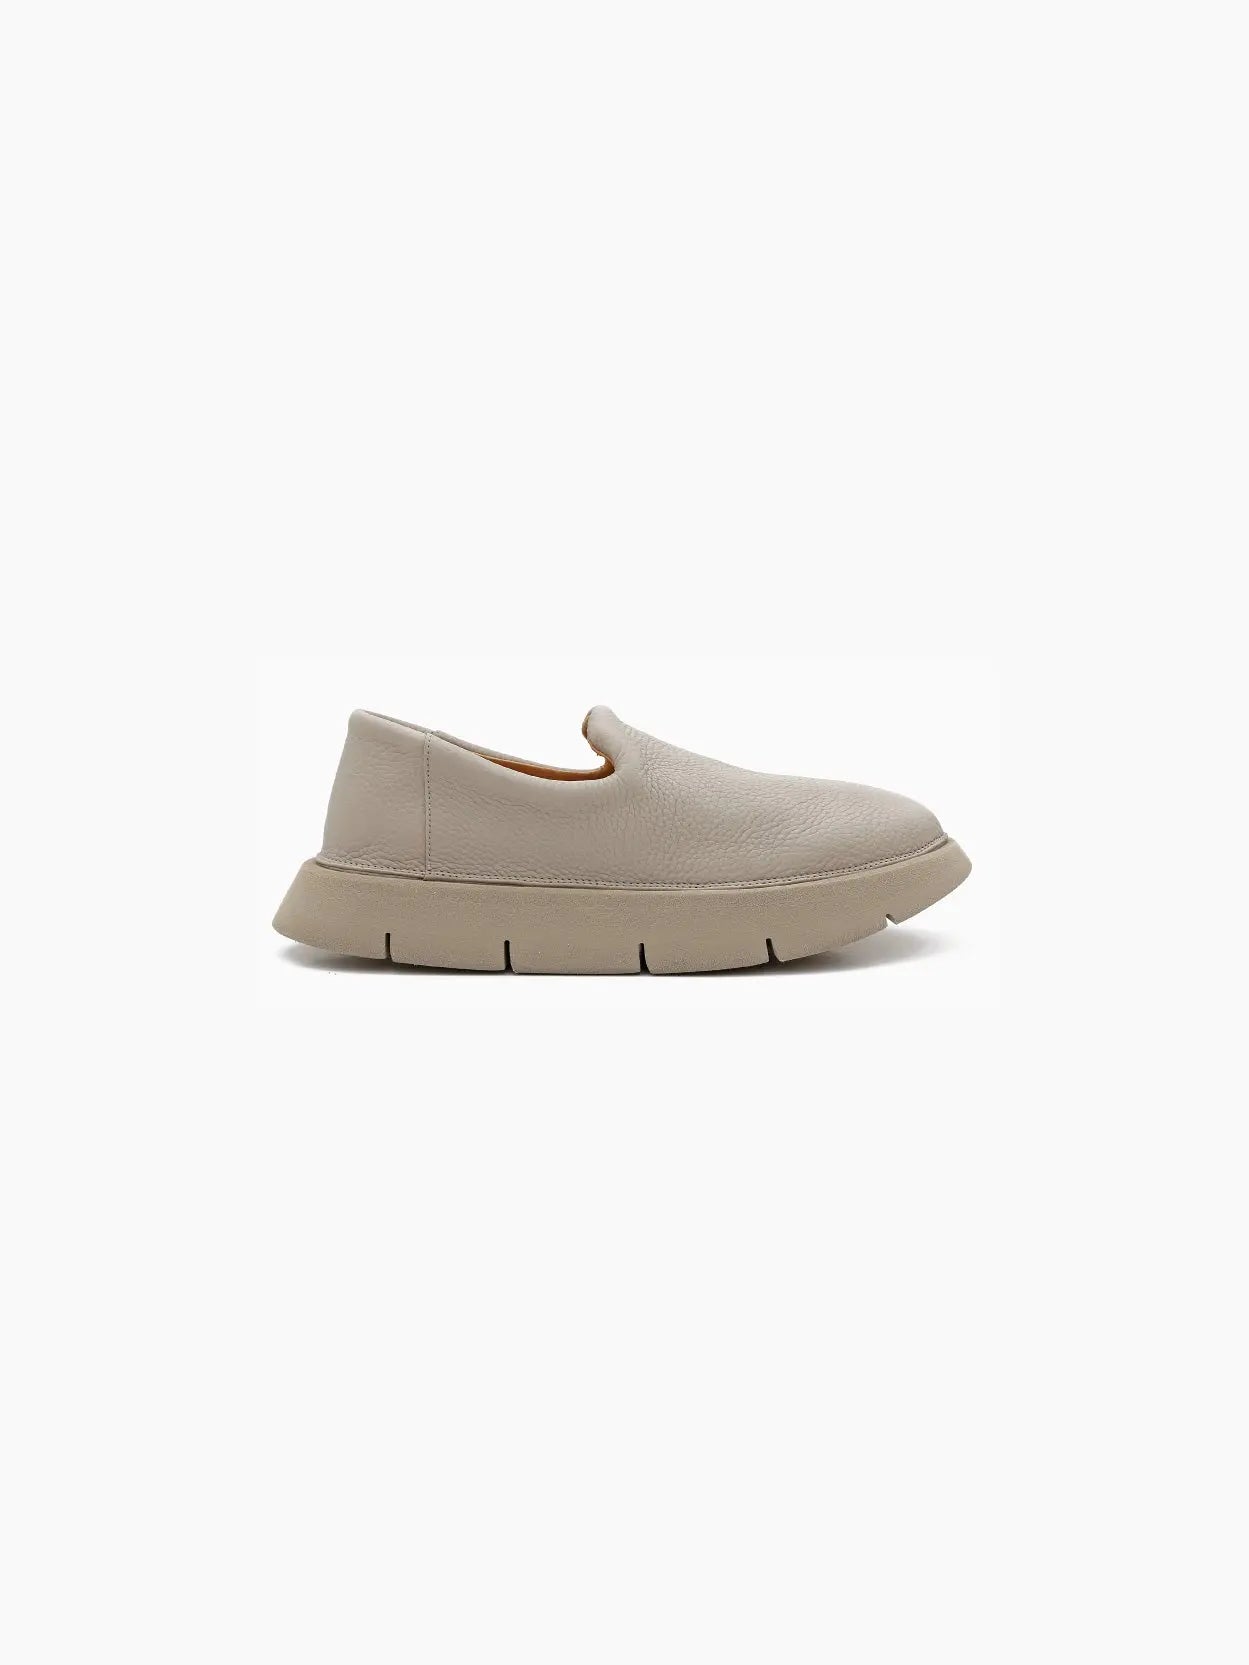 A single beige Intagliata Slip On Clay by Marsèll with a smooth, rounded toe and a slightly flared, chunky sole. The segmented design of the sole ensures flexibility. With its minimalist and modern appearance, this shoe stands out in any setting. Available now at bassalstore in Barcelona. The background is white.